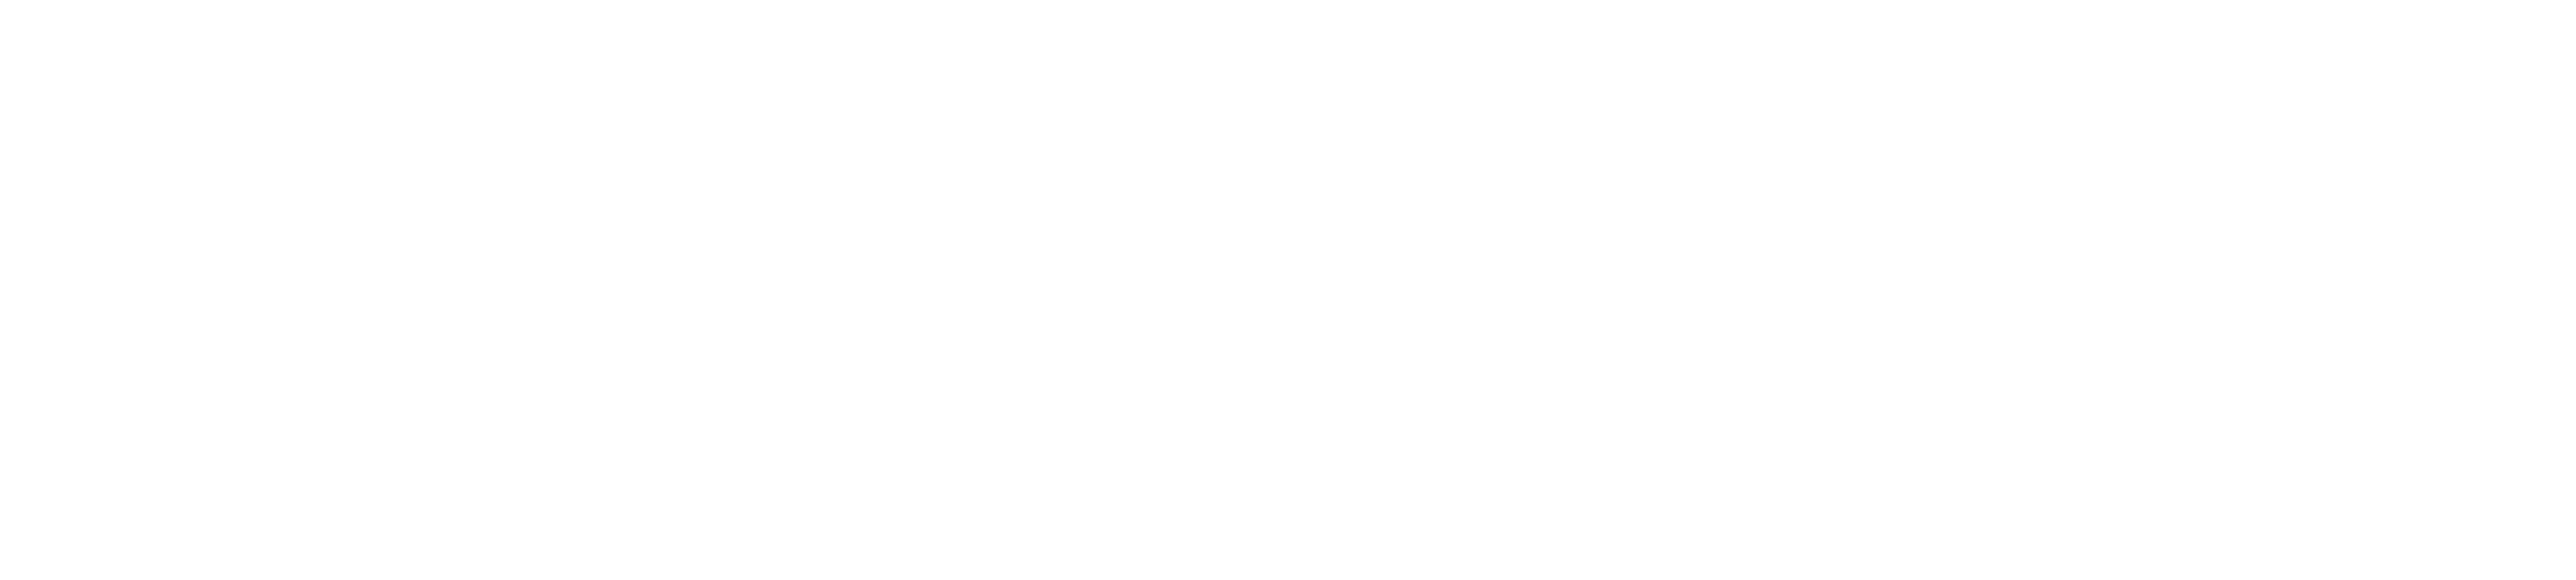 Vercel is one option for hosting your site on a free tier.